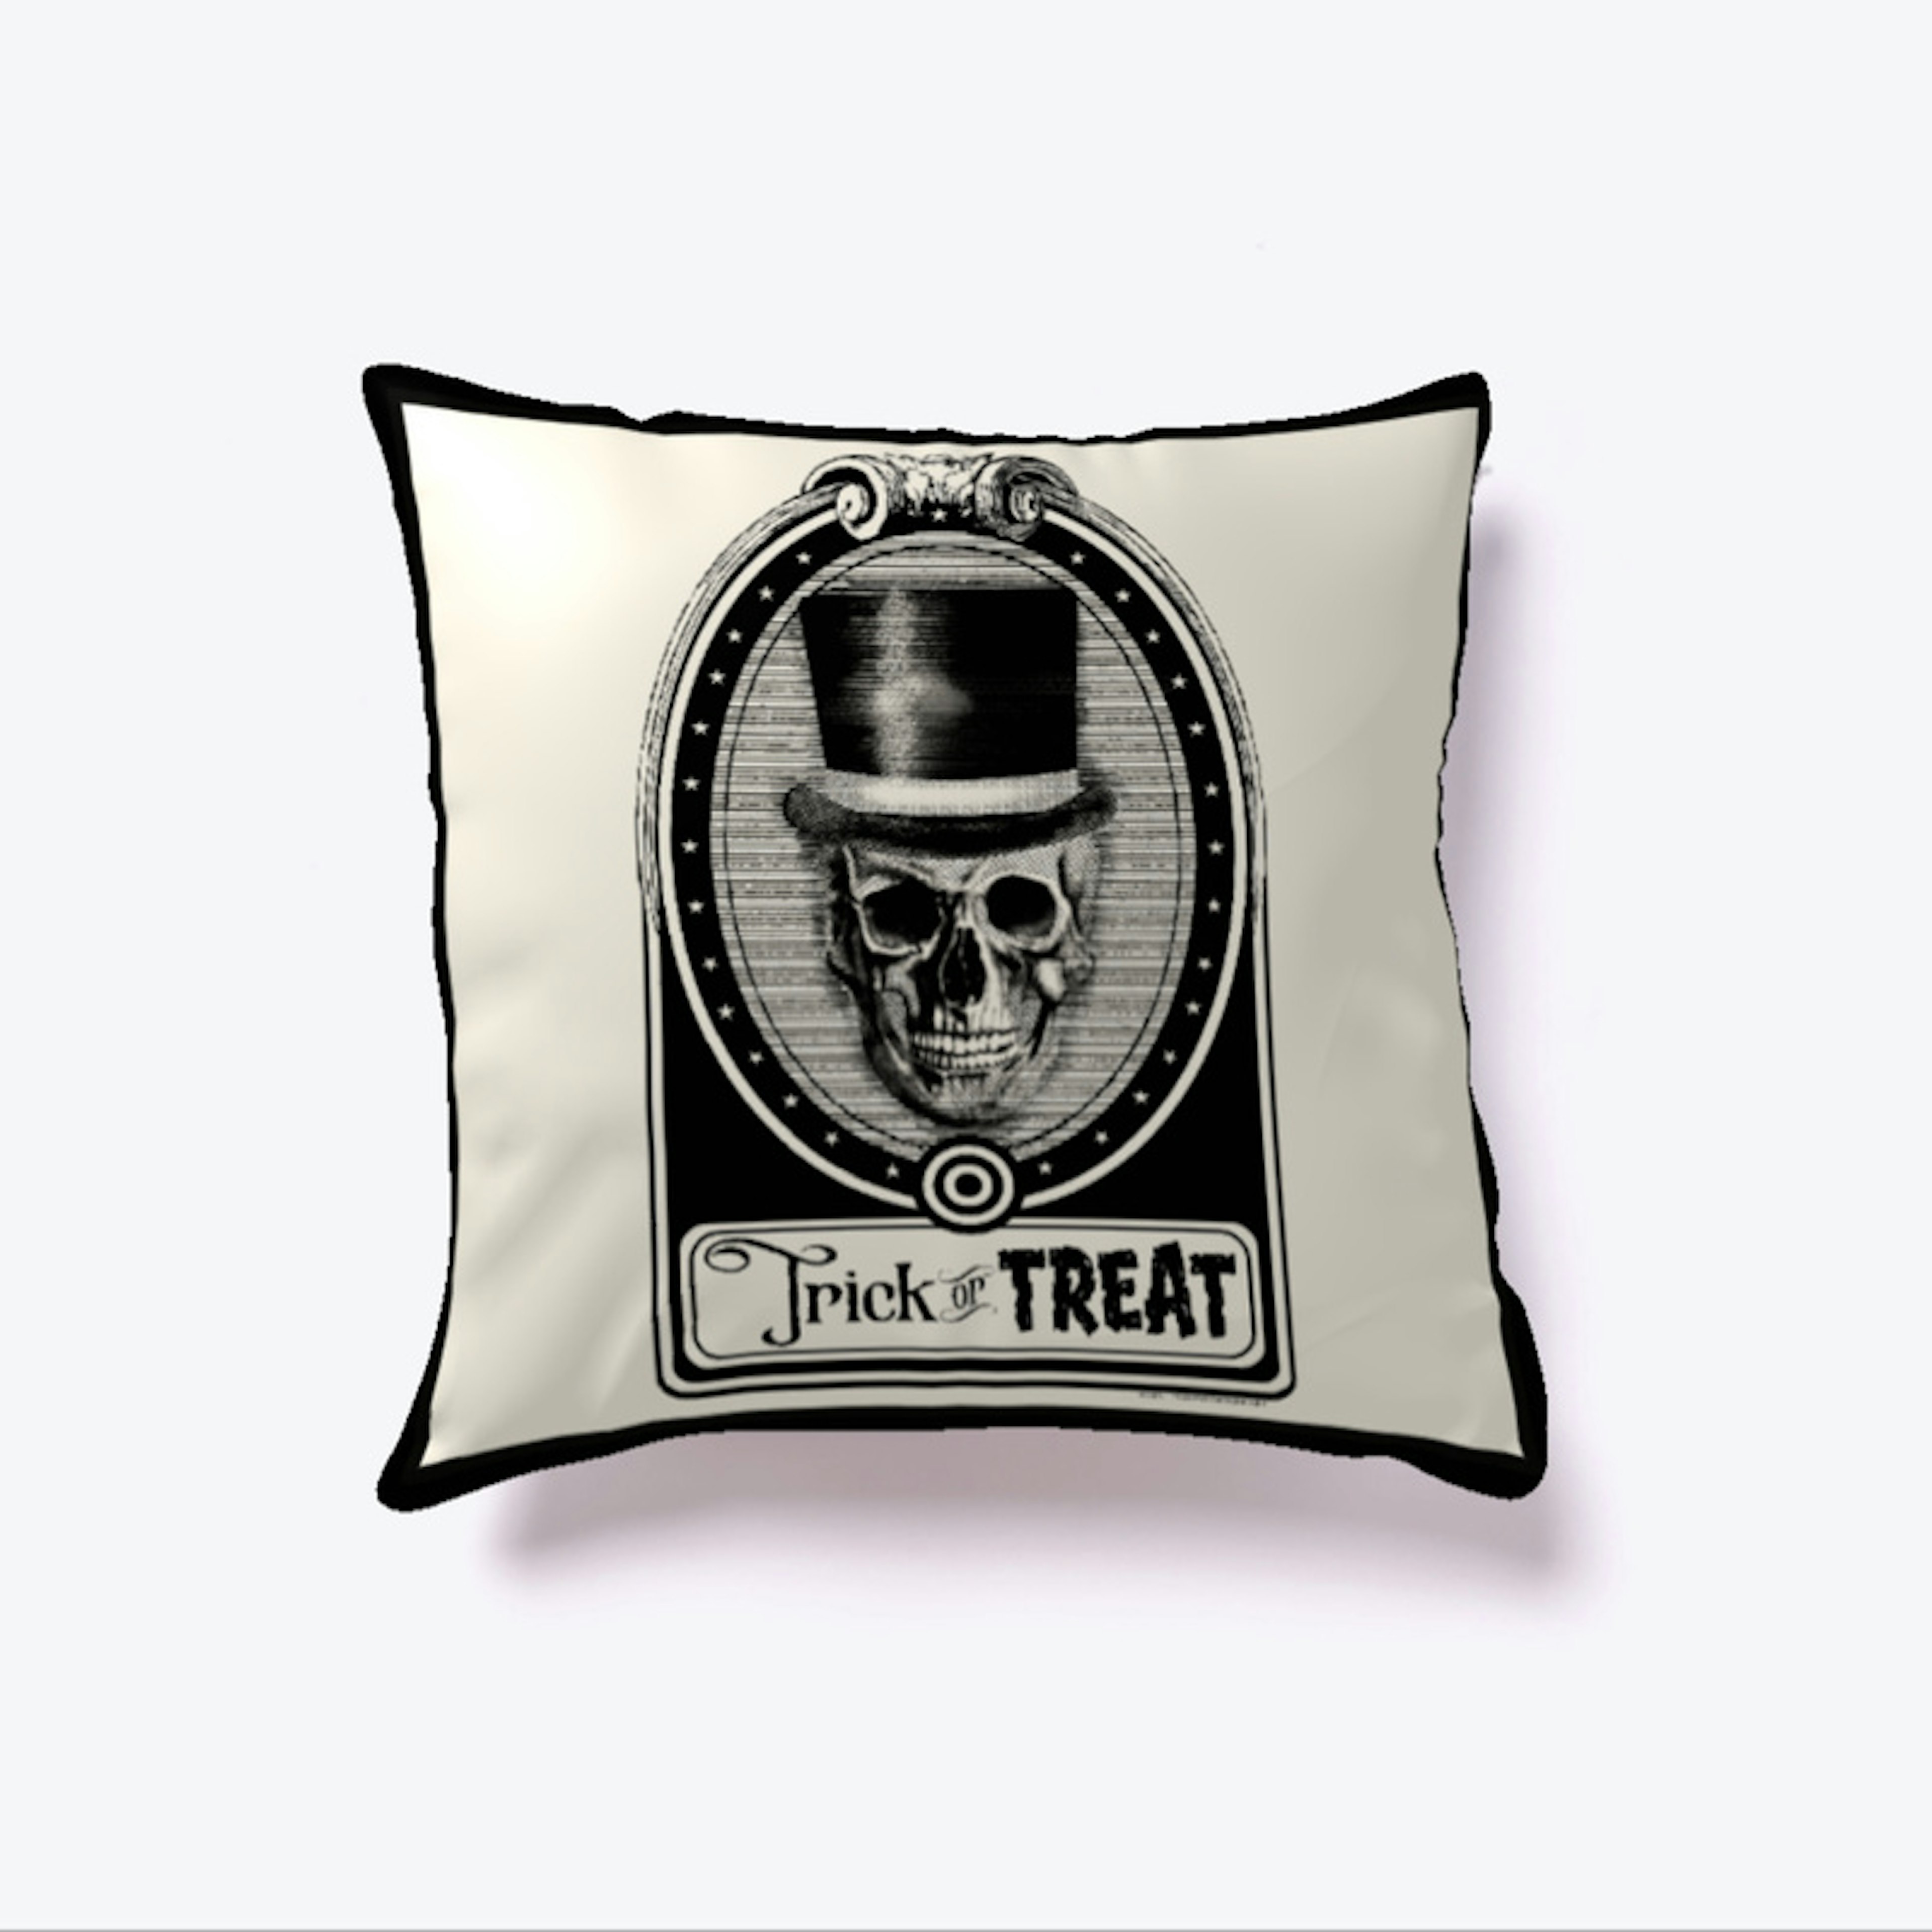 Sir Dead Trick or Treat Pillow